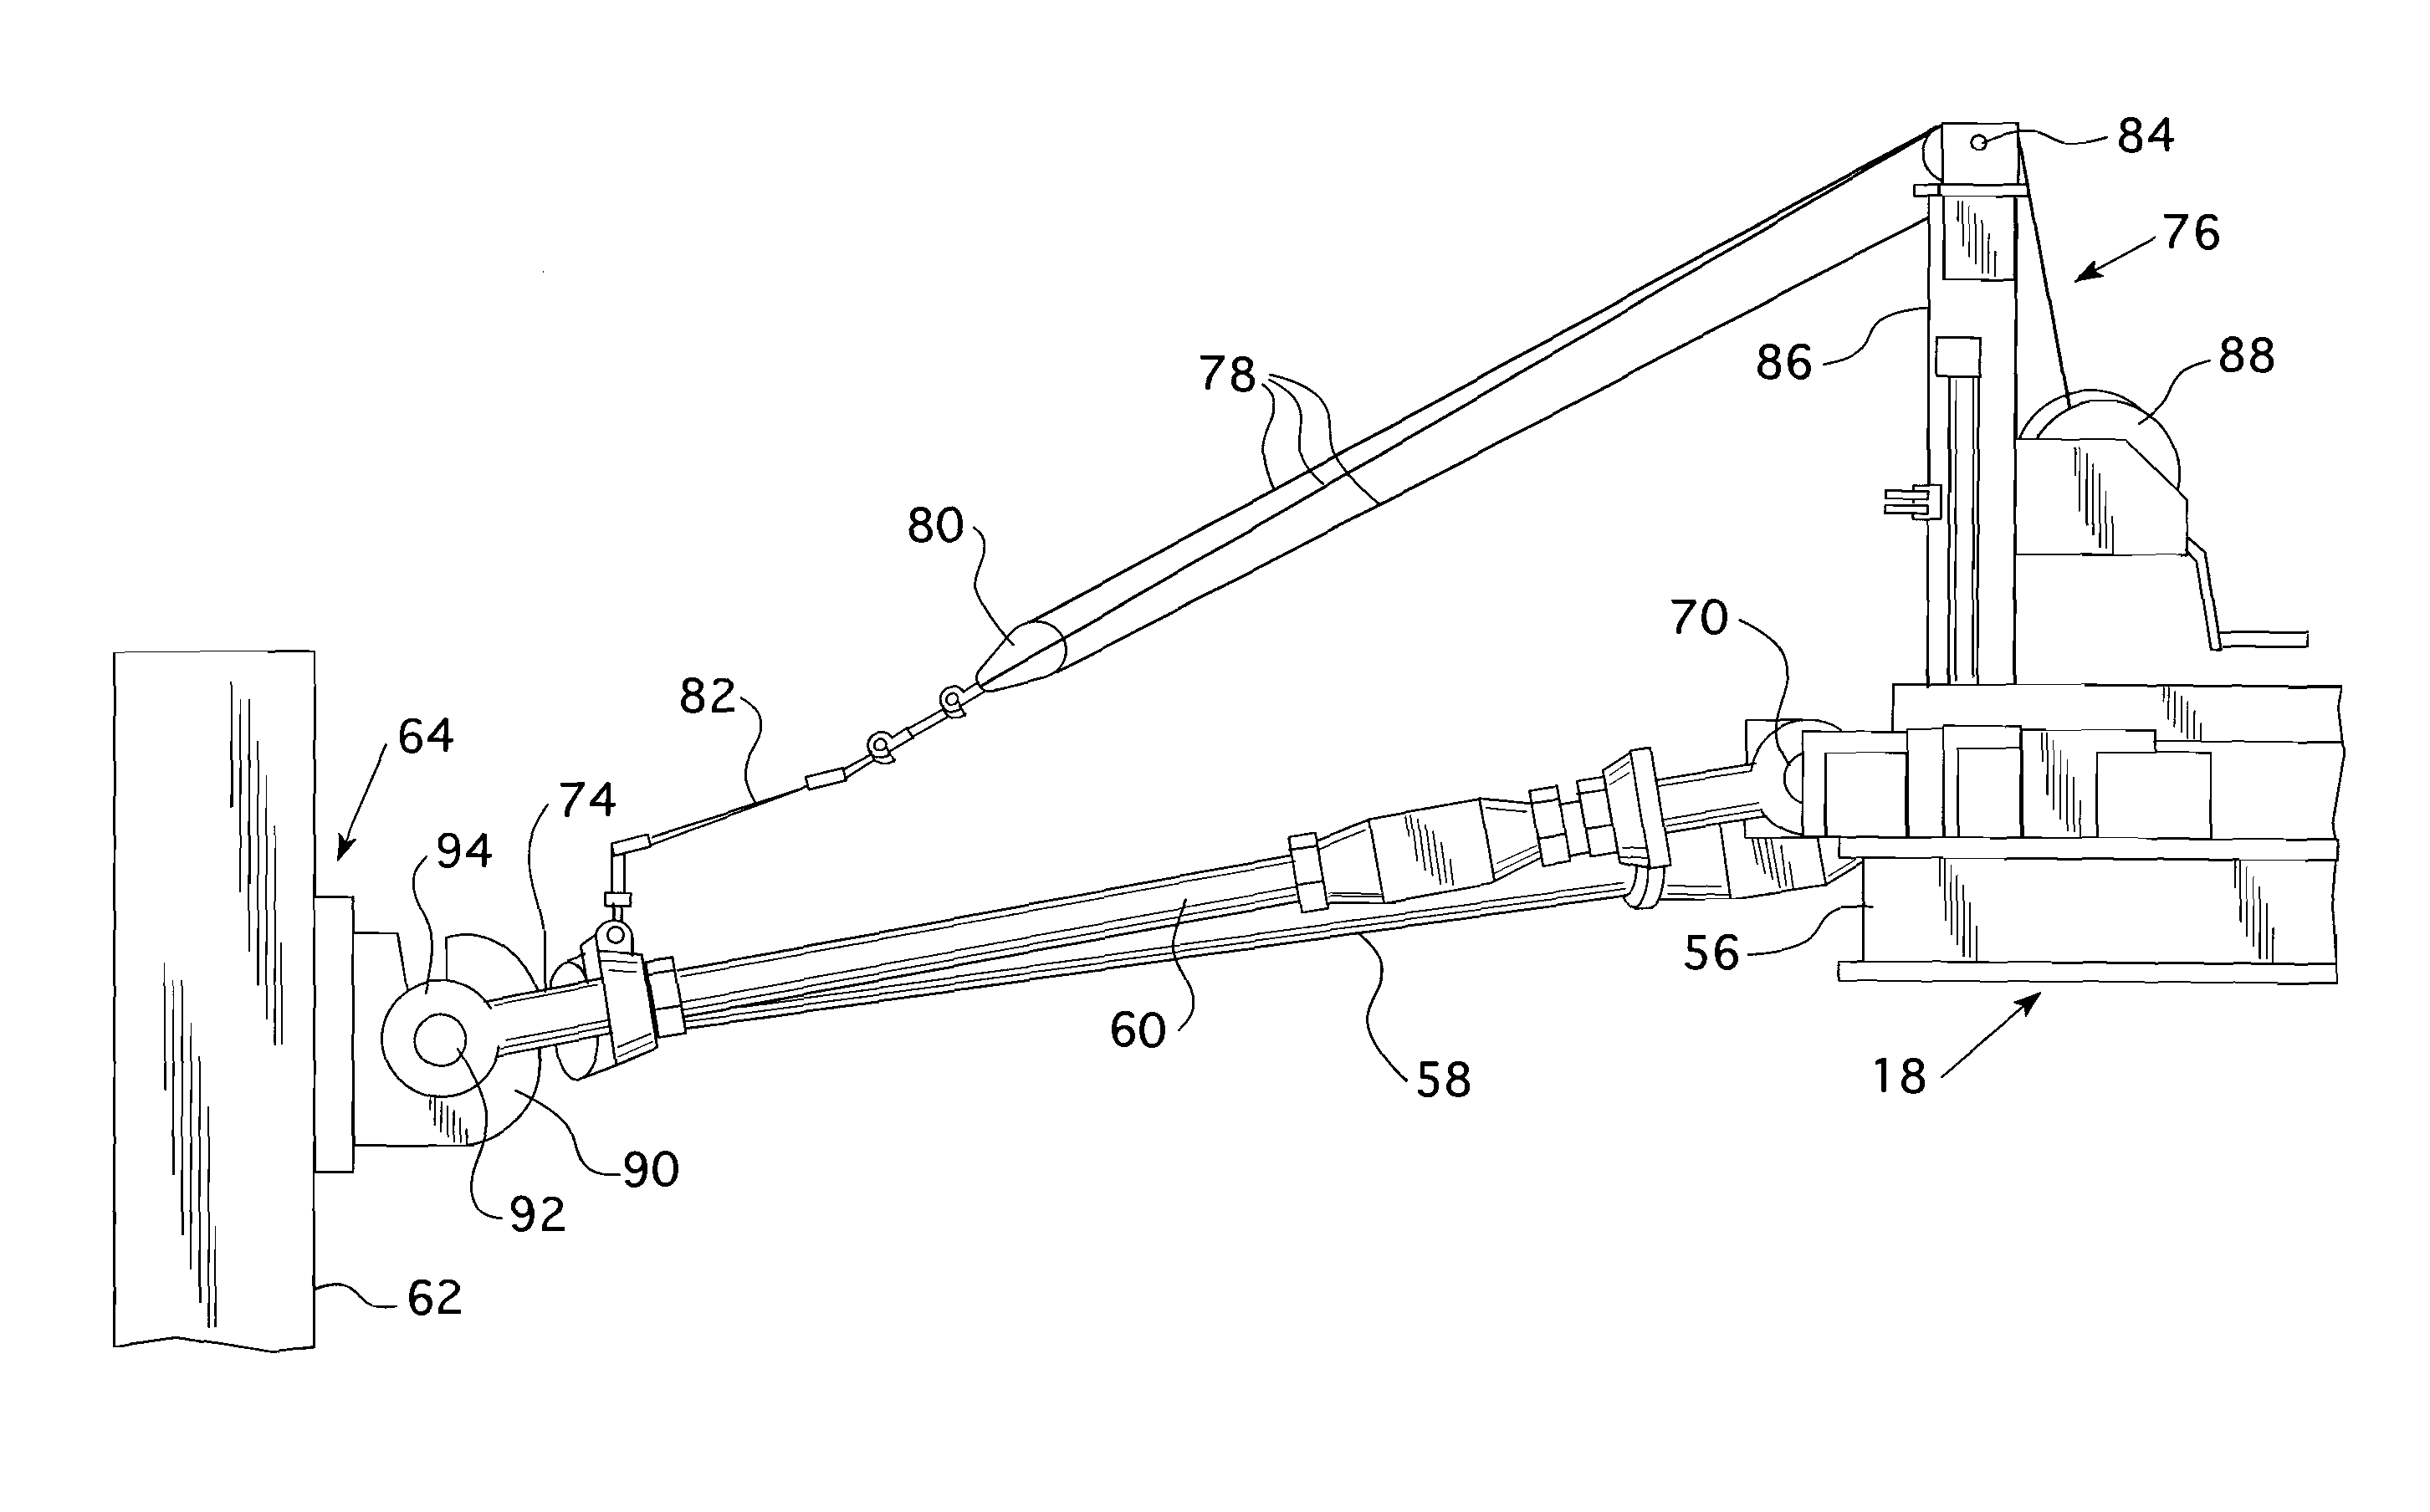 Reactor head seismic support tie rod system